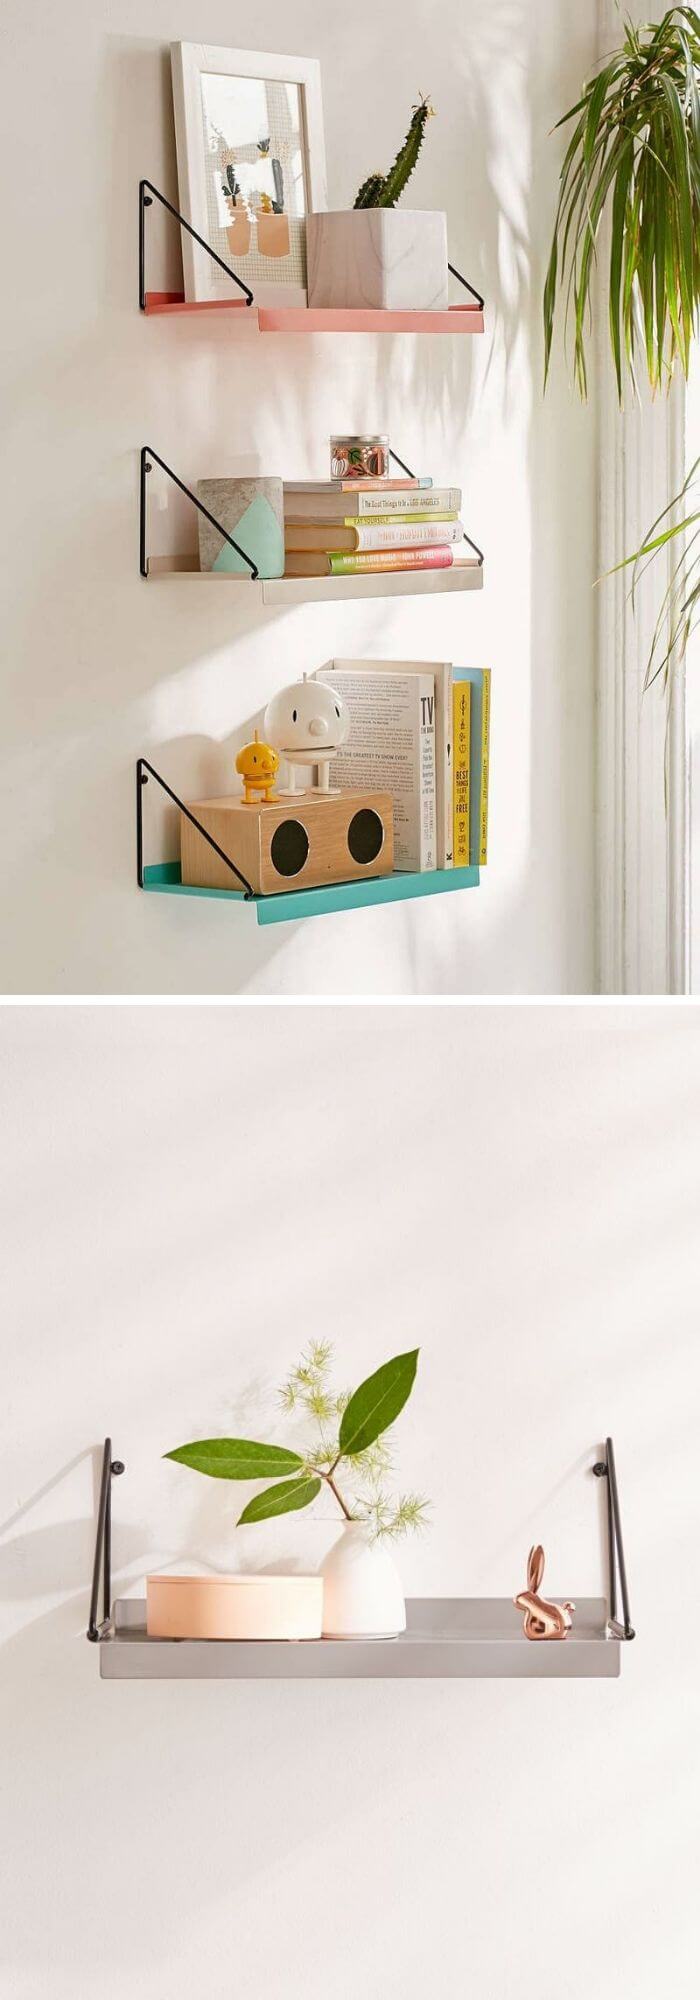 Organize your books by color, show off your cute office supplies